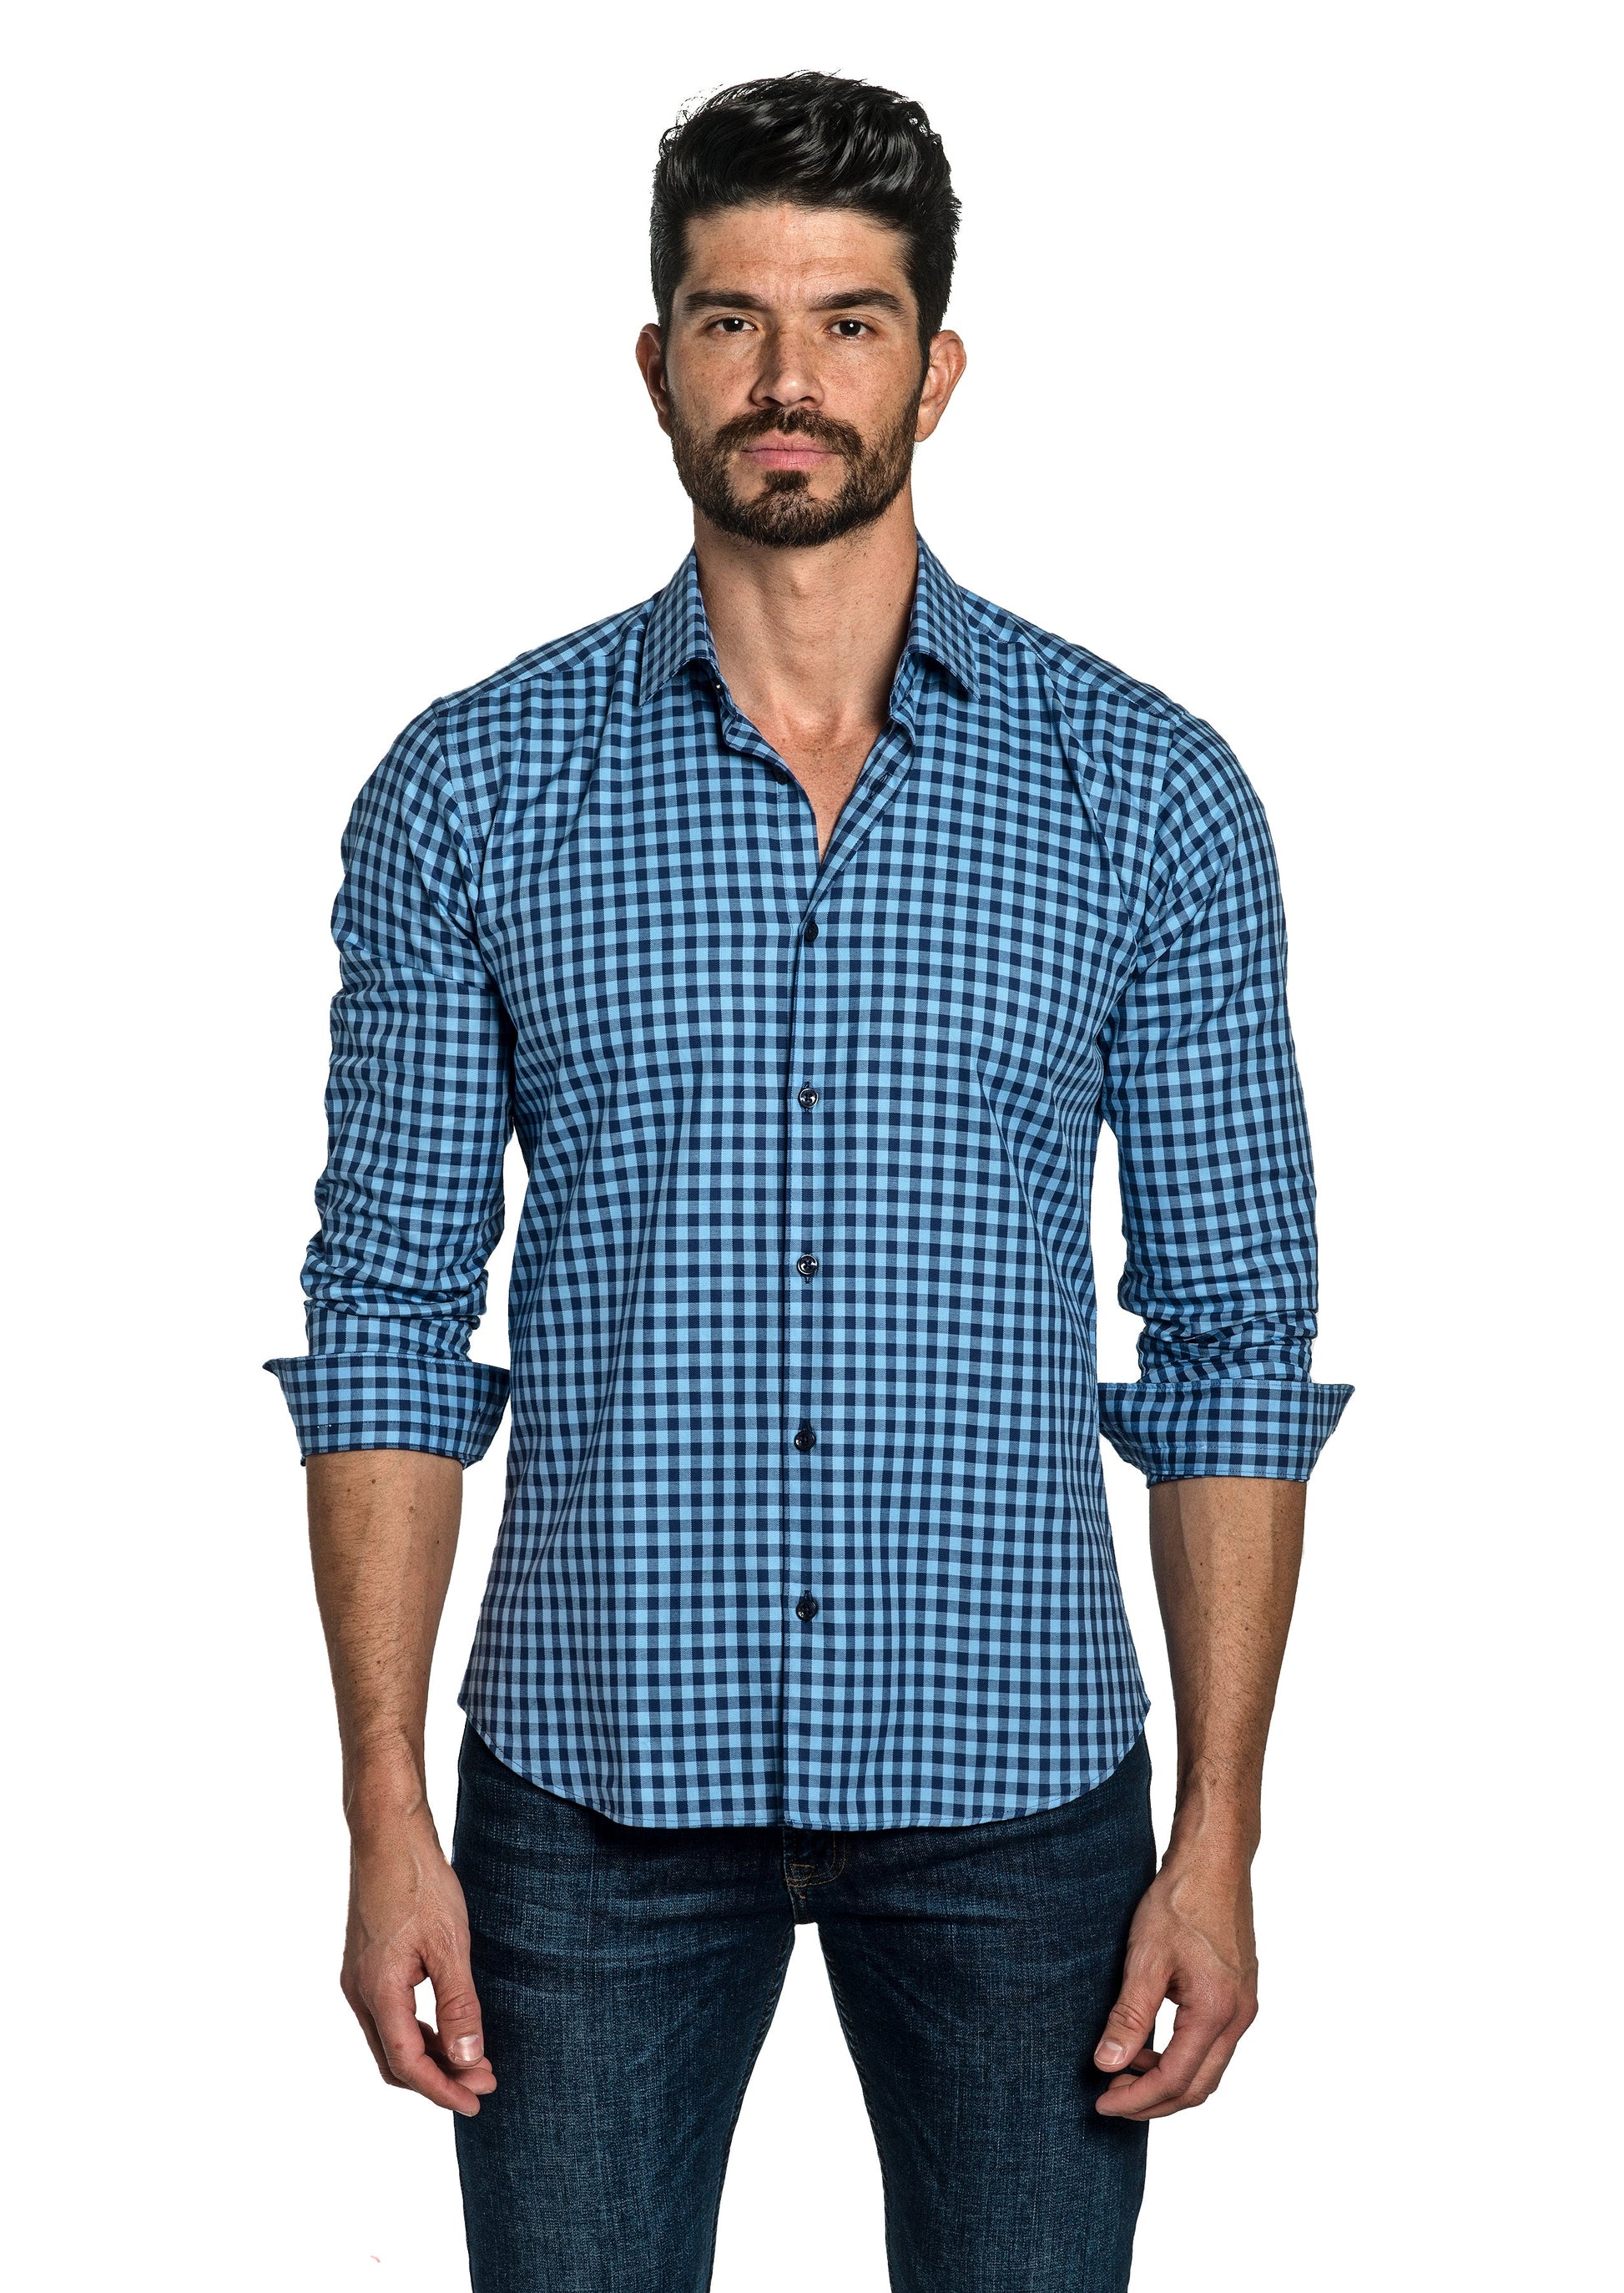 Blue Gingham Long Sleeve Shirt T-6755 Front